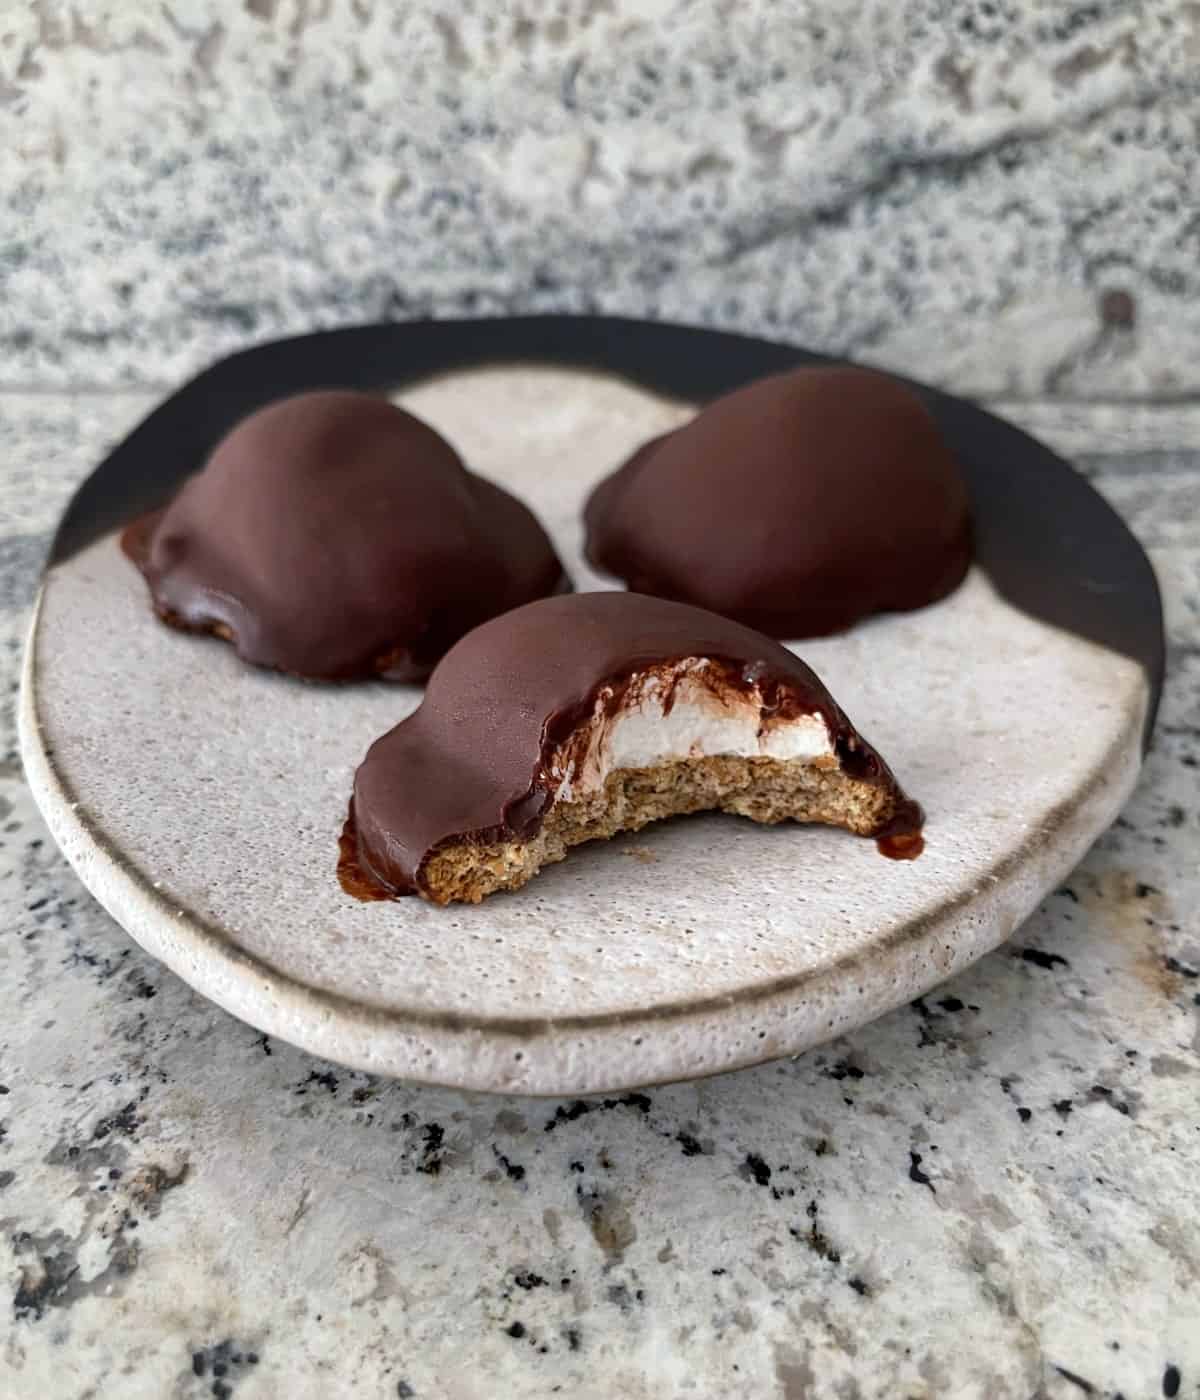 Three homemade chocolate covered marshmallow fluff cookies on ceramic plate with bite taken from one cookie.